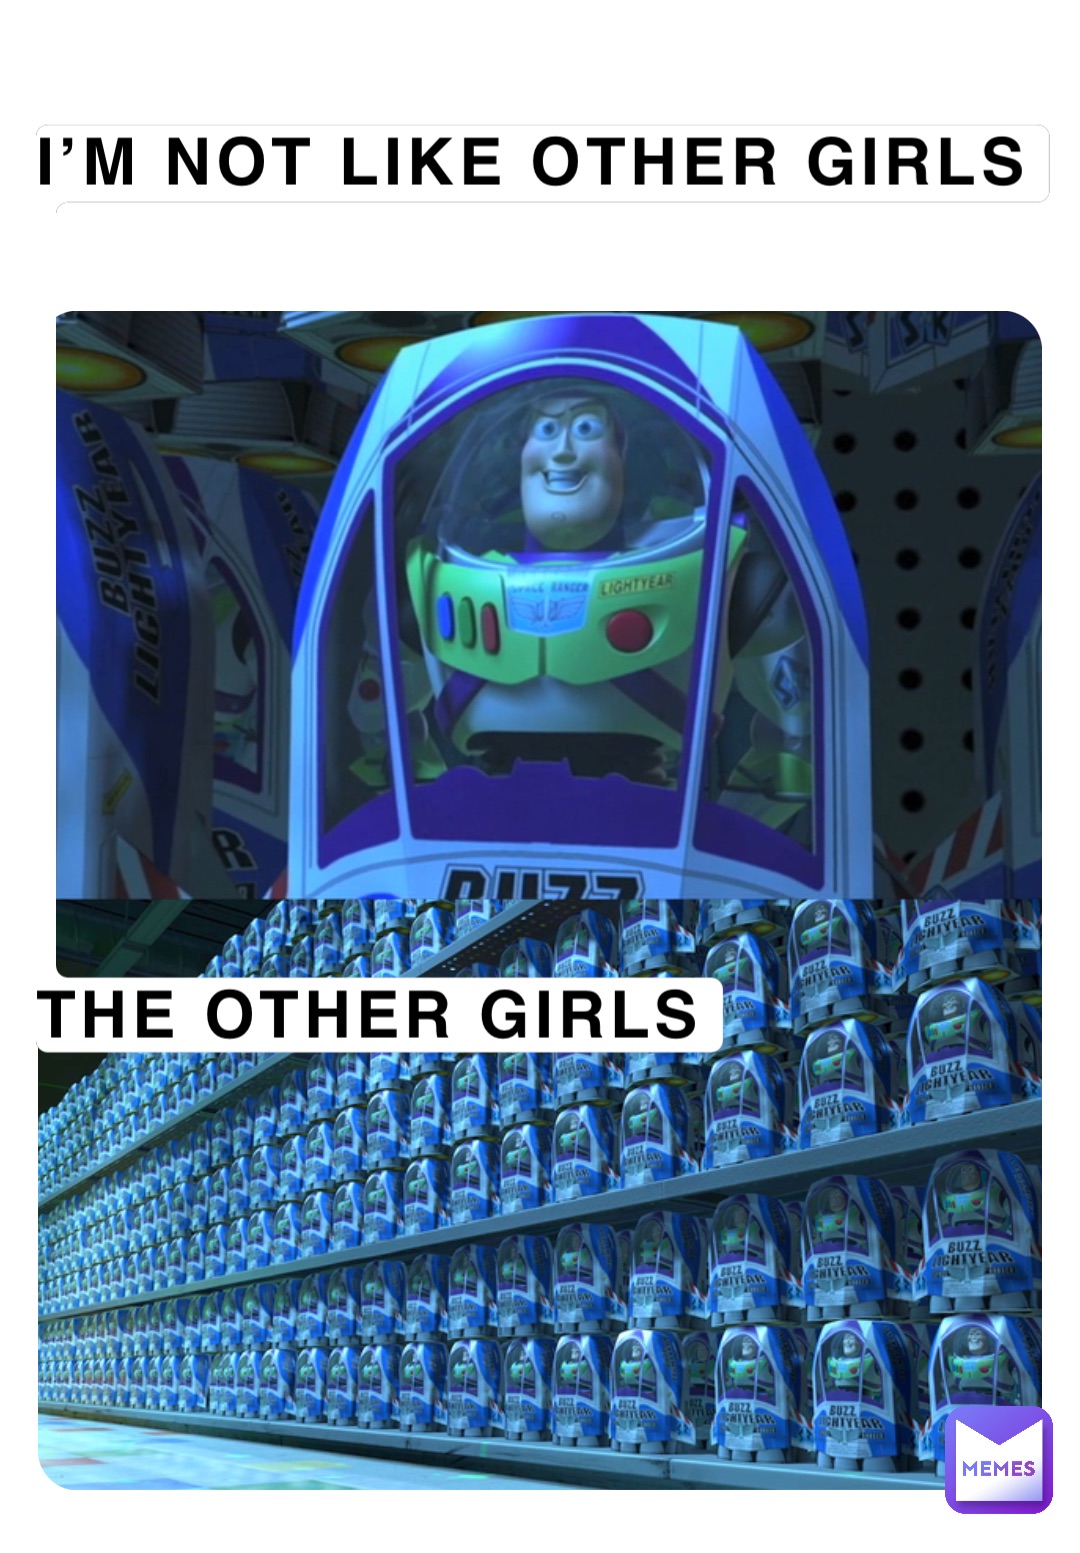 I’M NOT LIKE OTHER GIRLS










THE OTHER GIRLS